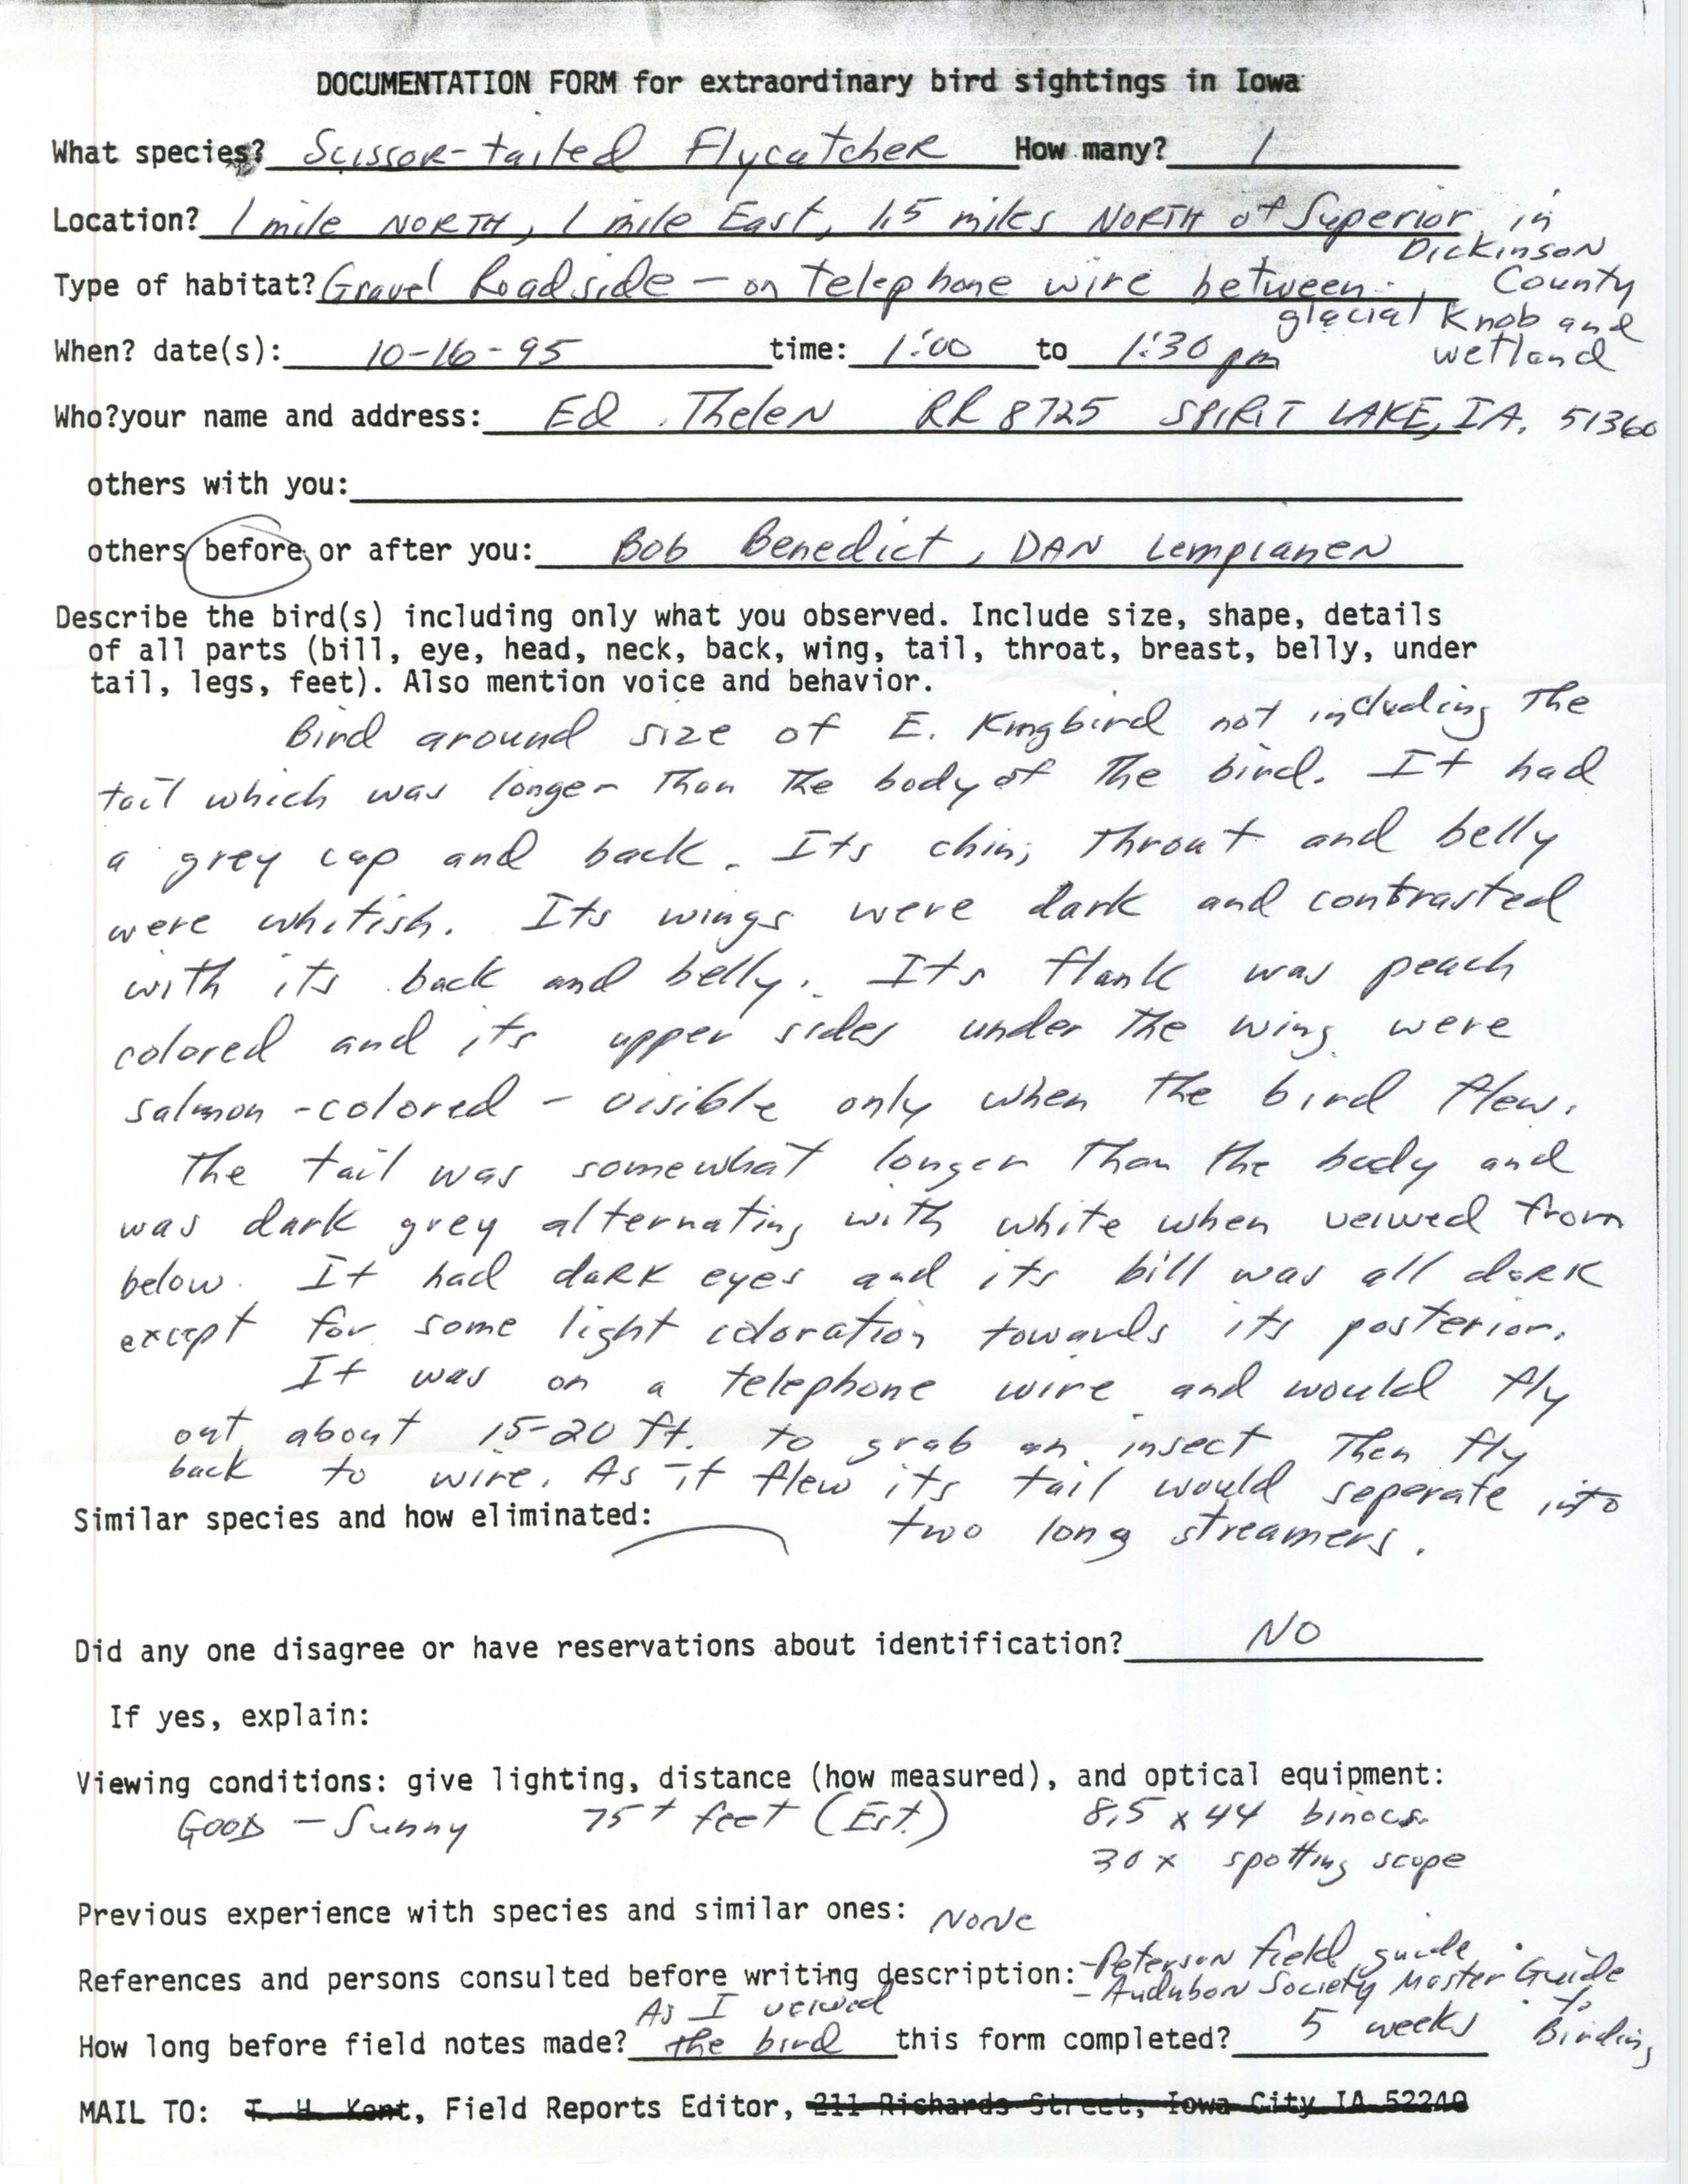 Rare bird documentation form for Scissor-tailed Flycatcher north and east of Superior, 1995